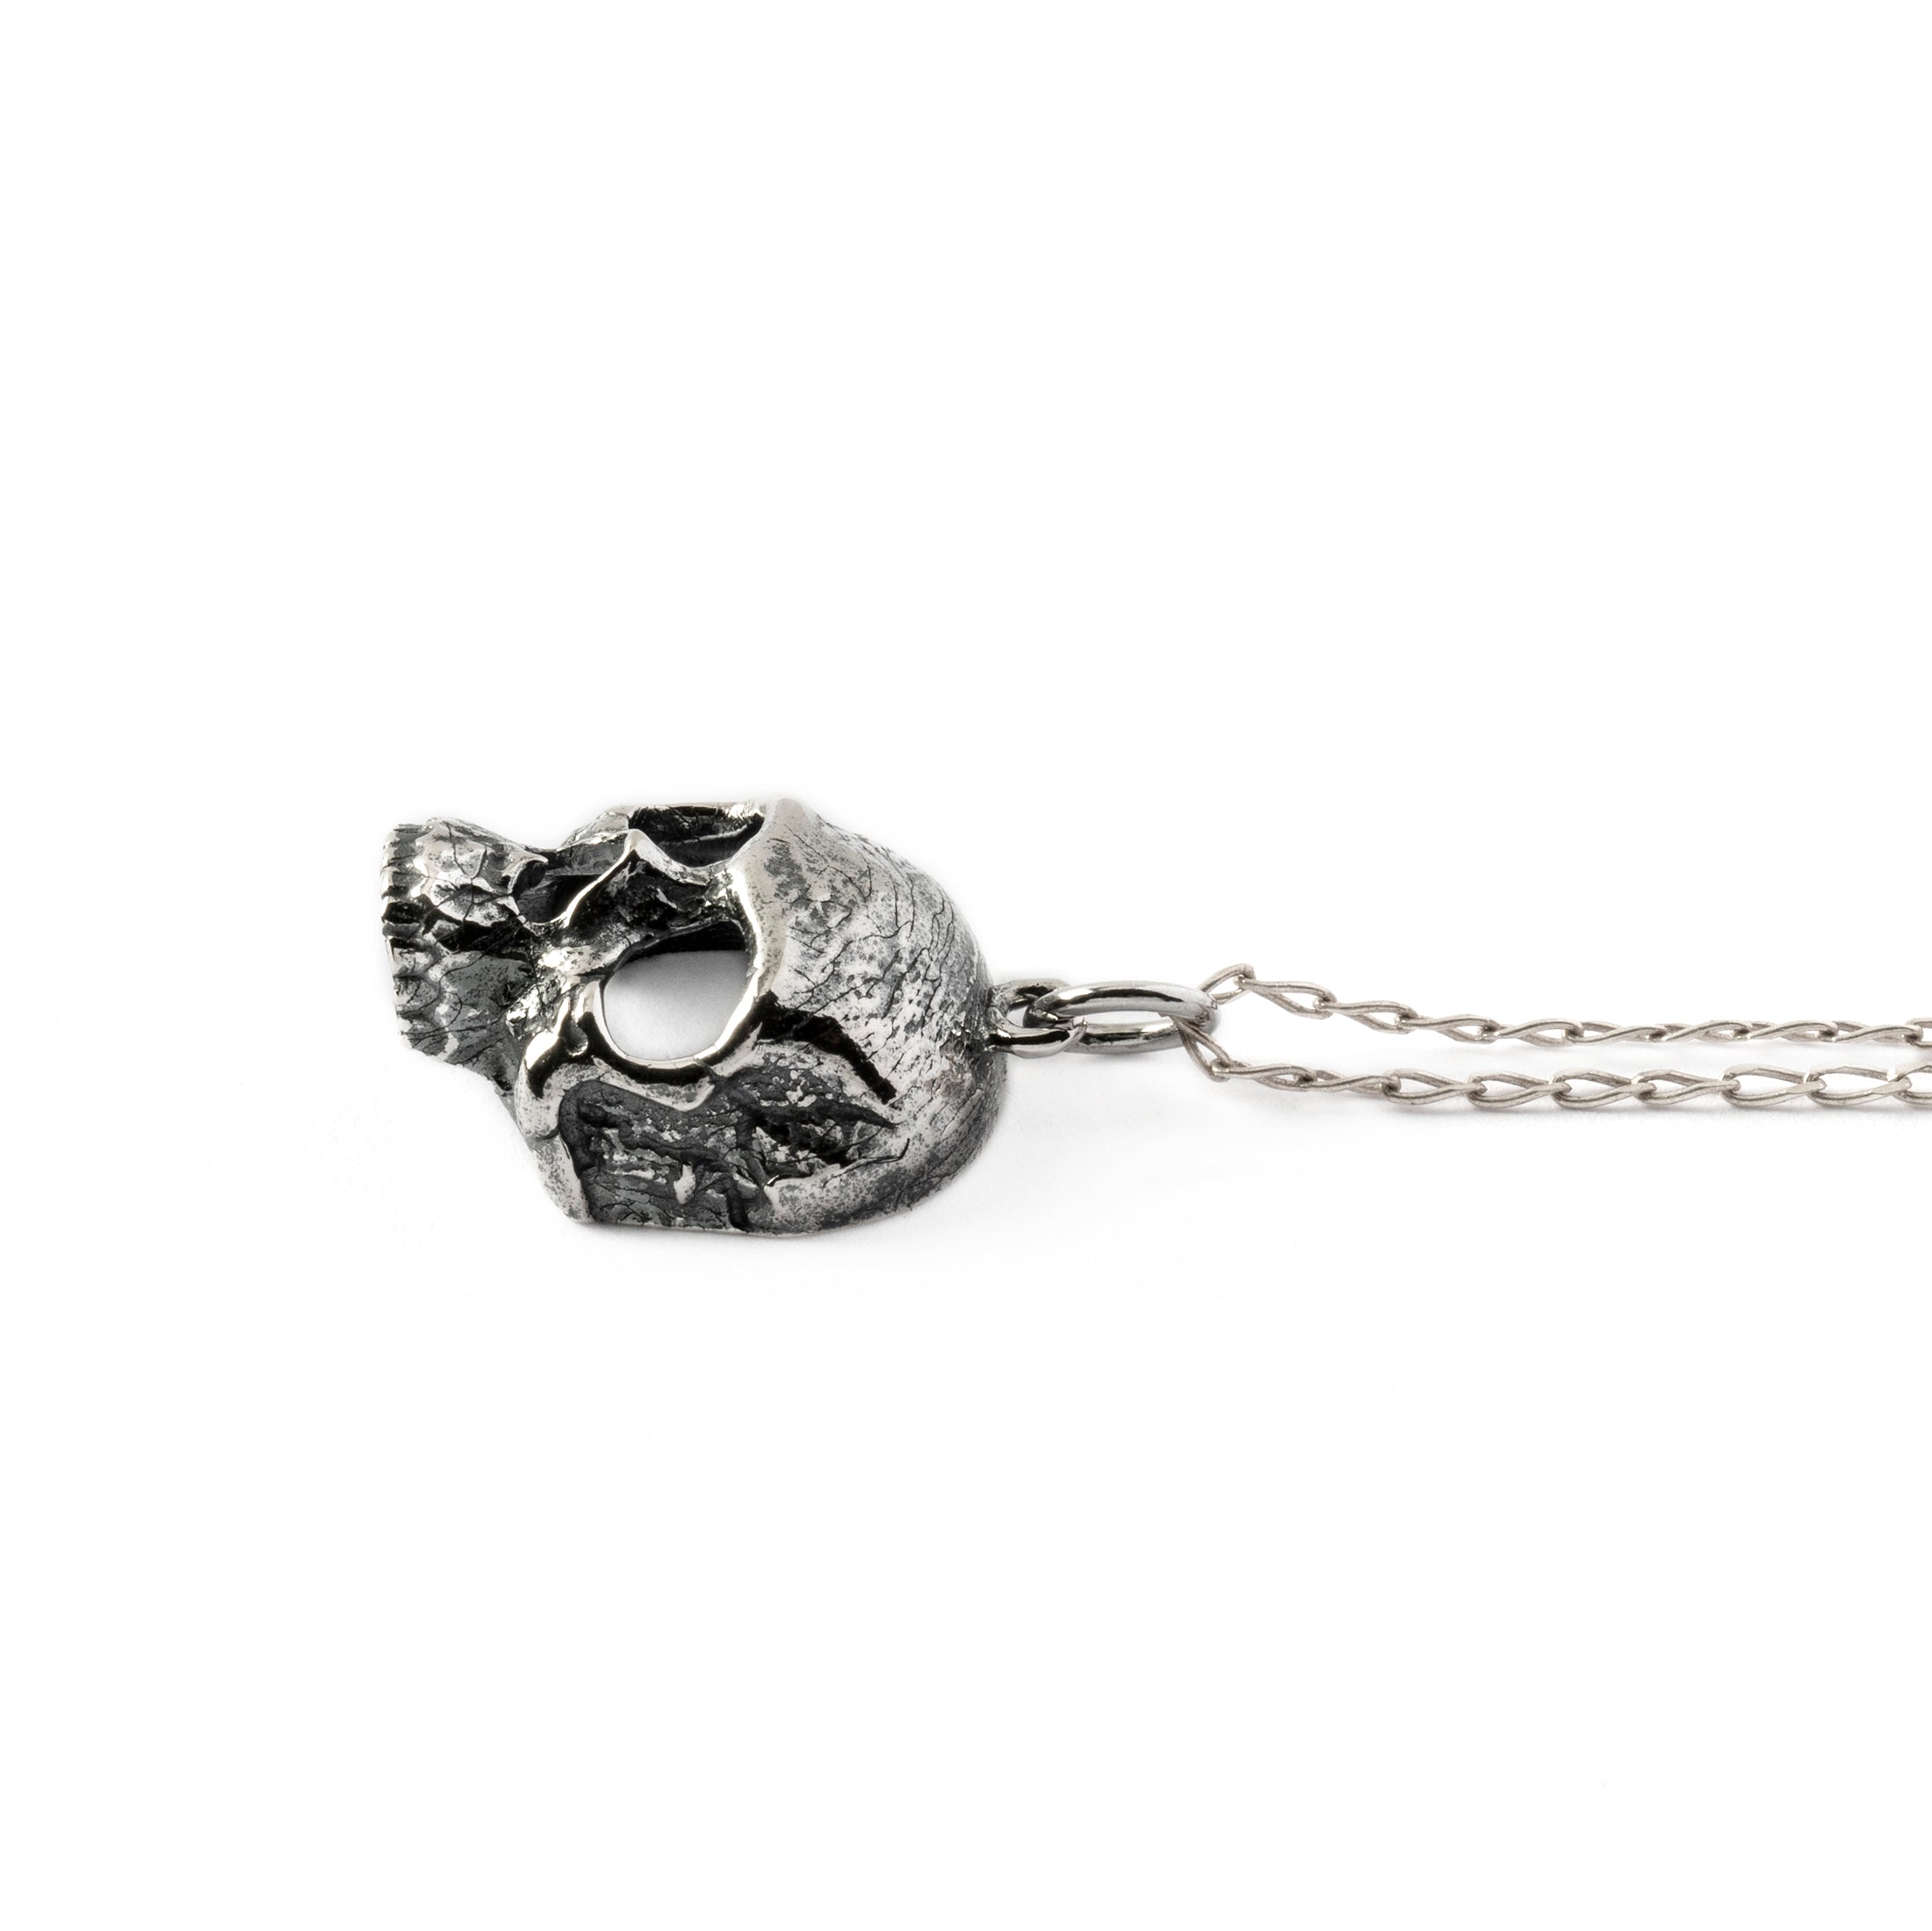 Immortal silver charm necklace side view